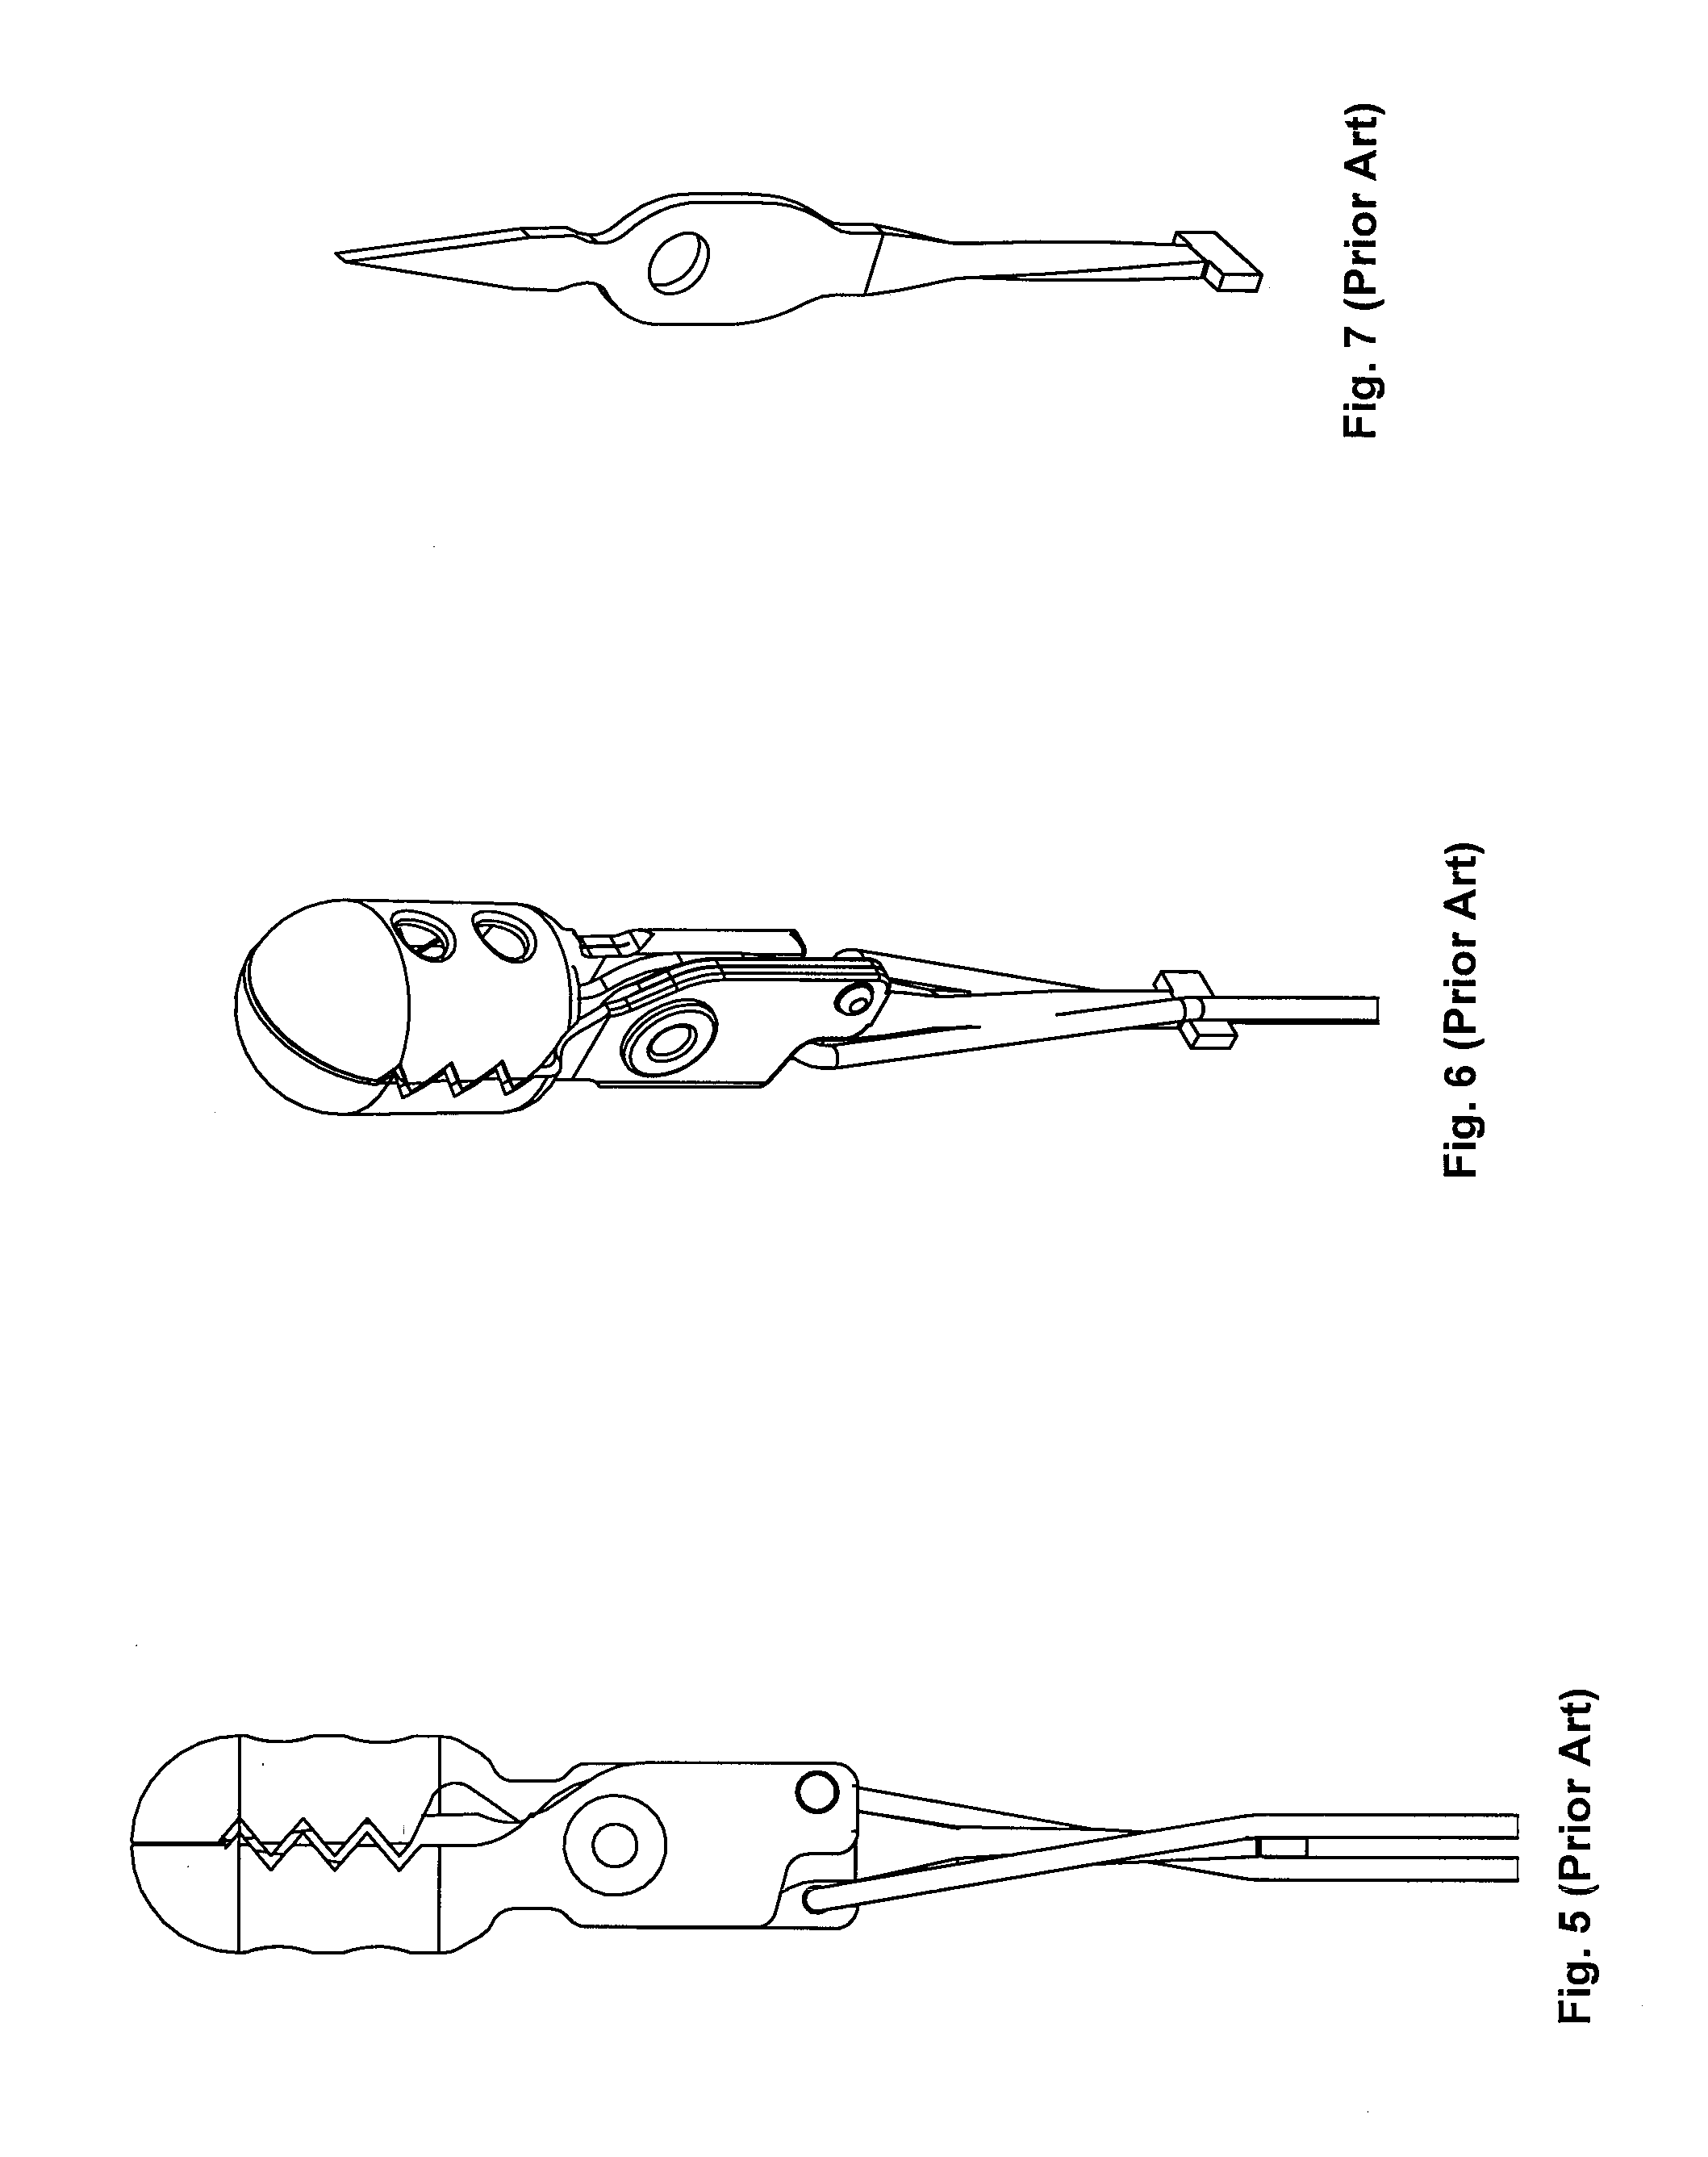 End effector assembly with increased clamping force for a surgical instrument